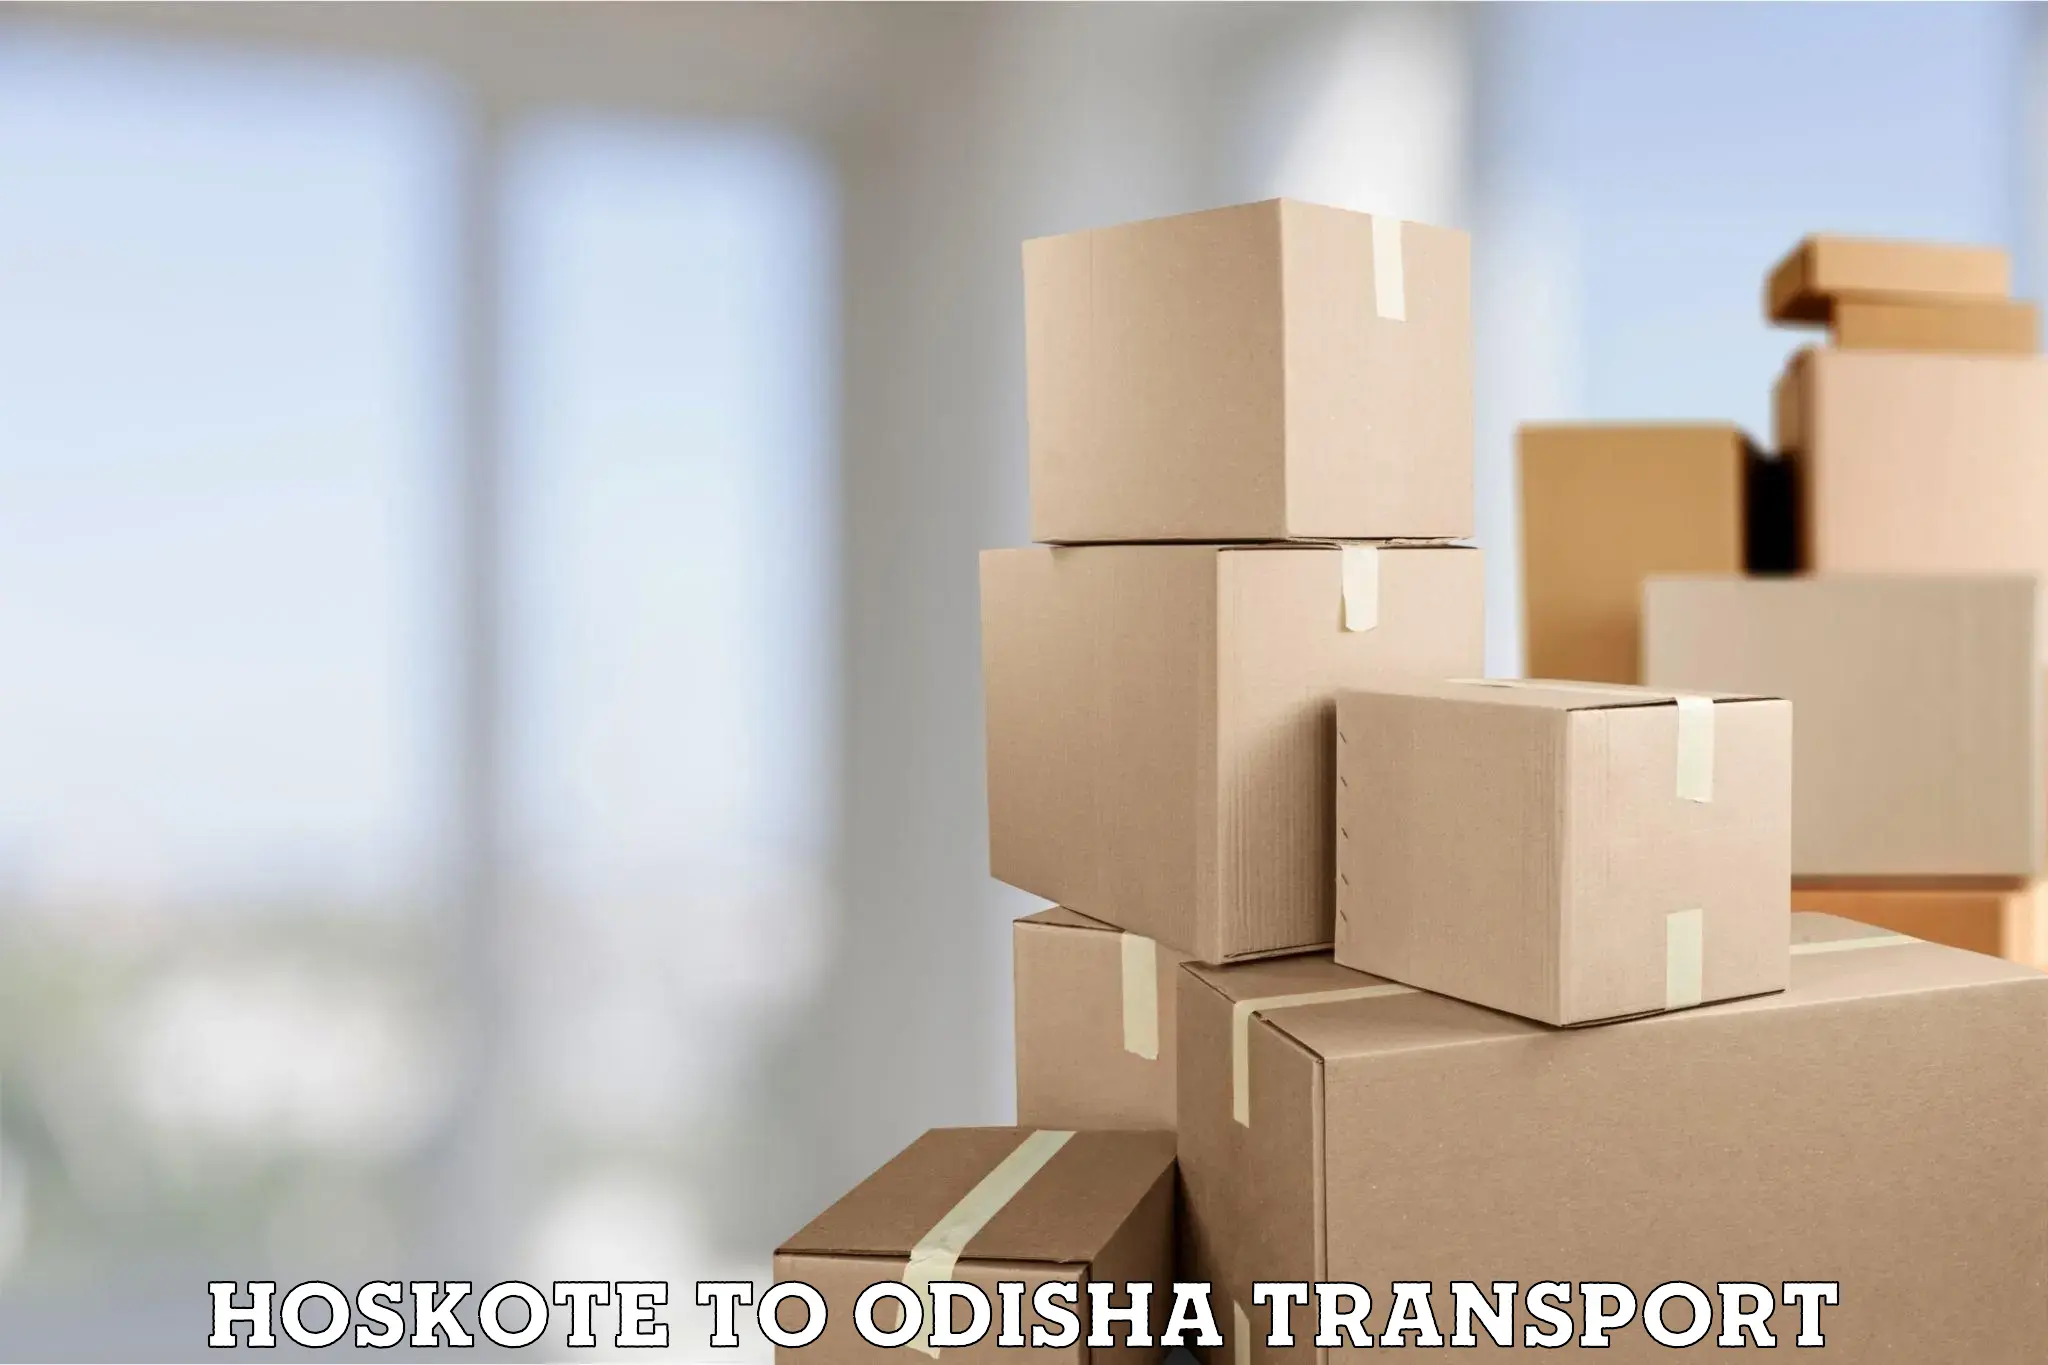 Lorry transport service Hoskote to Asika